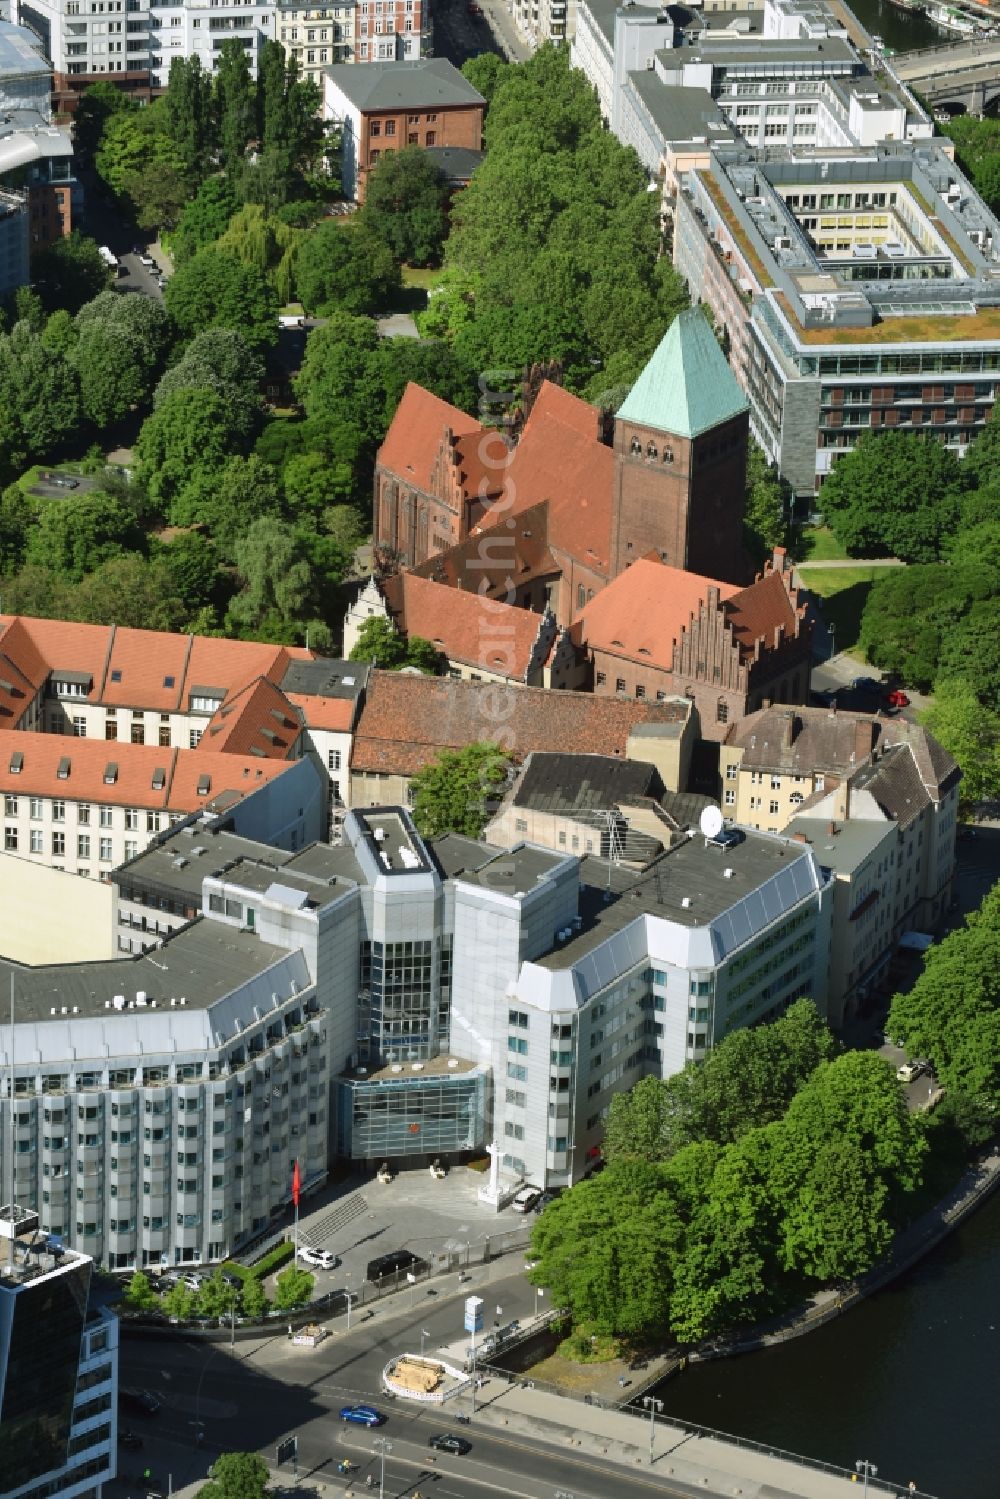 Berlin from above - Embassy buildings and grounds of the Diplomatic Mission - Botschaft and Generalkonsulate of Volksrepublik China in of Bandesrepublik Deutschland on Maerkisches Ufer in the district Mitte in Berlin, Germany